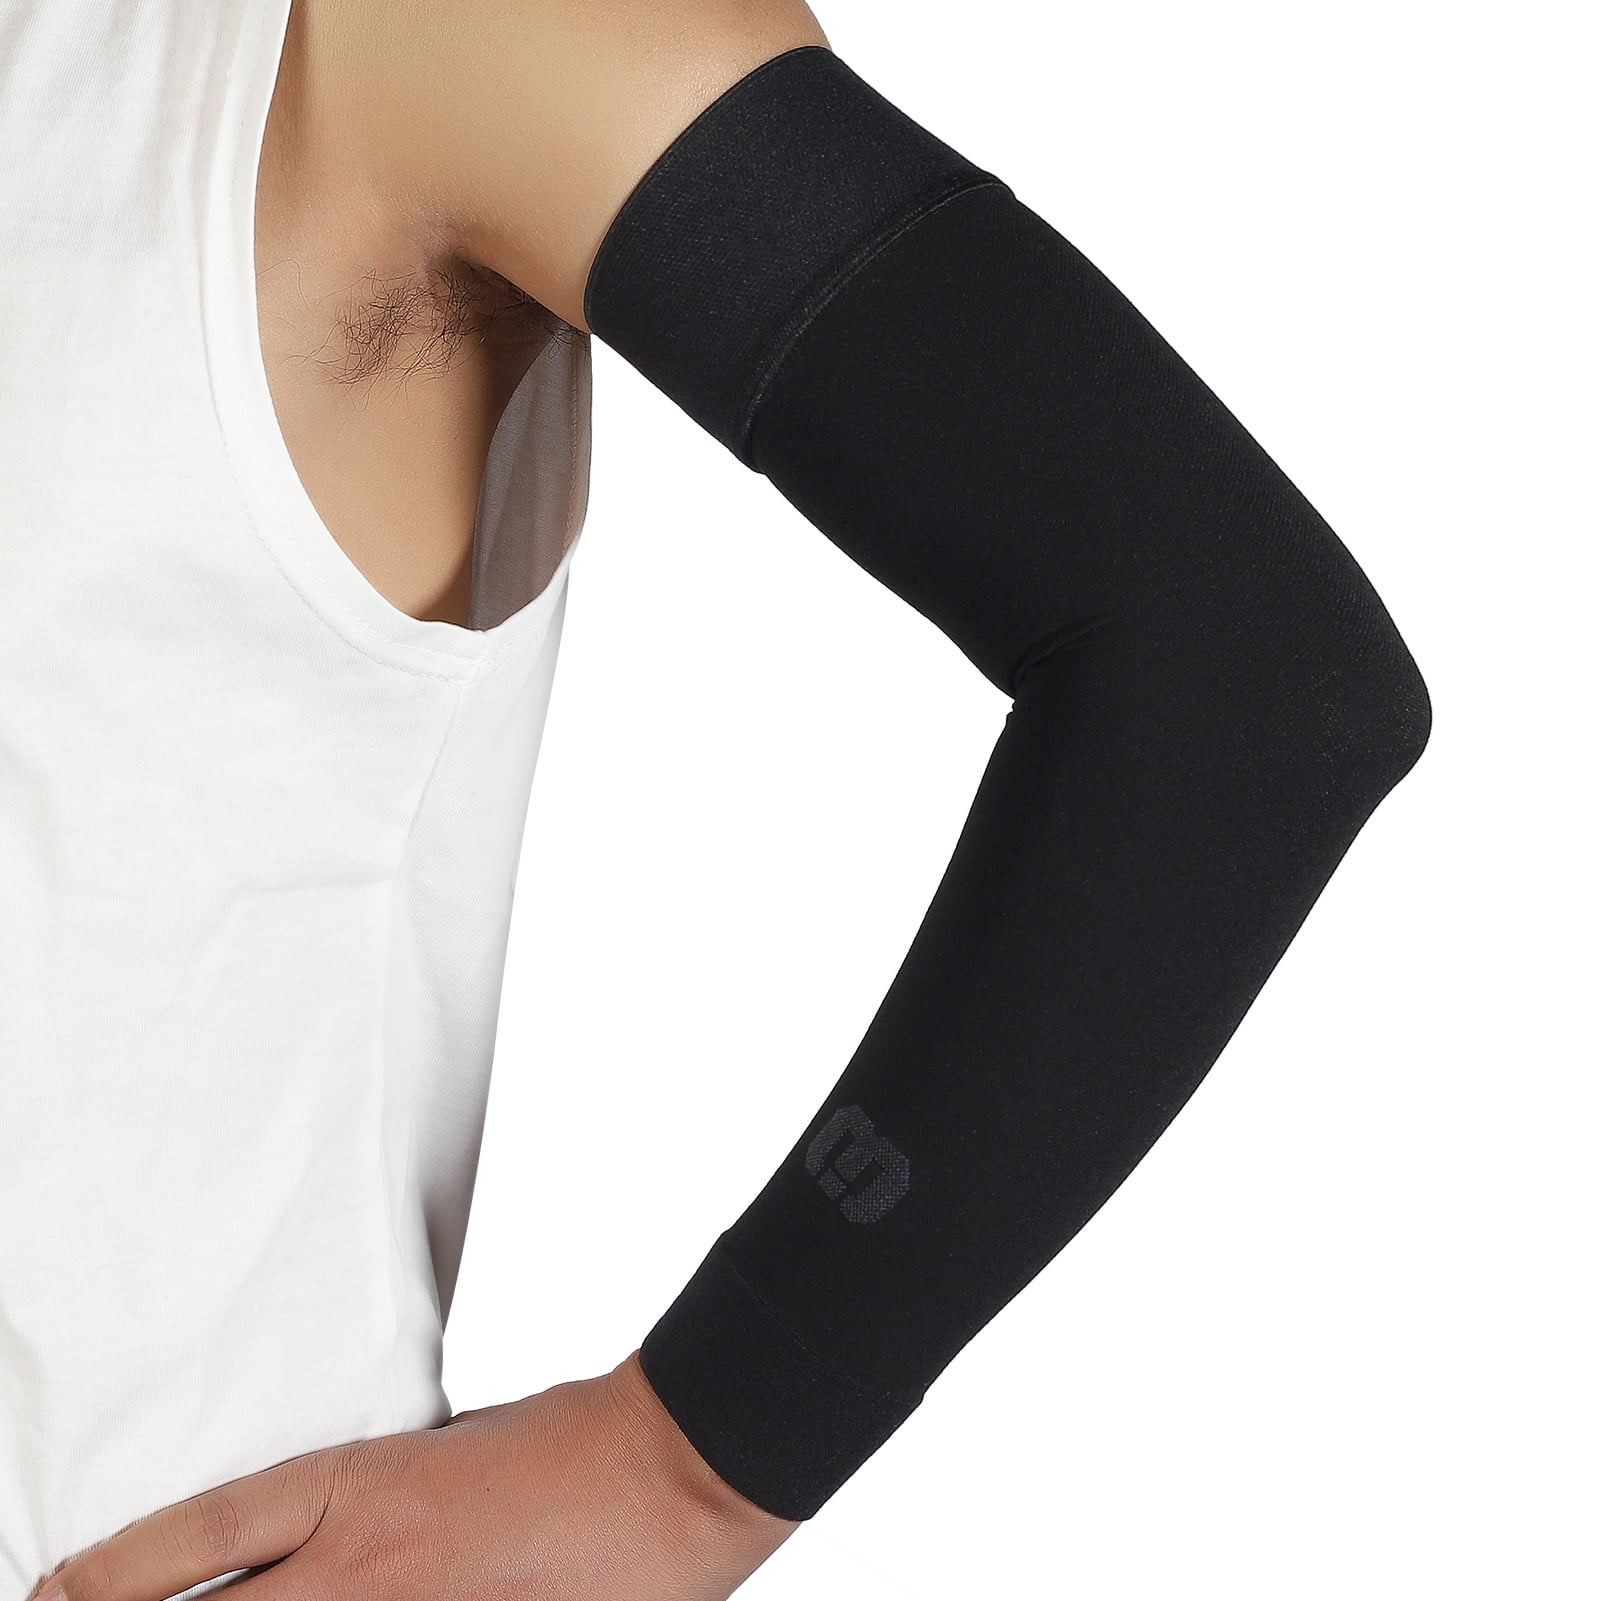 AMZAM Compression Arm Sleeve for Men and Women, 20-30 mmHg, Single ...